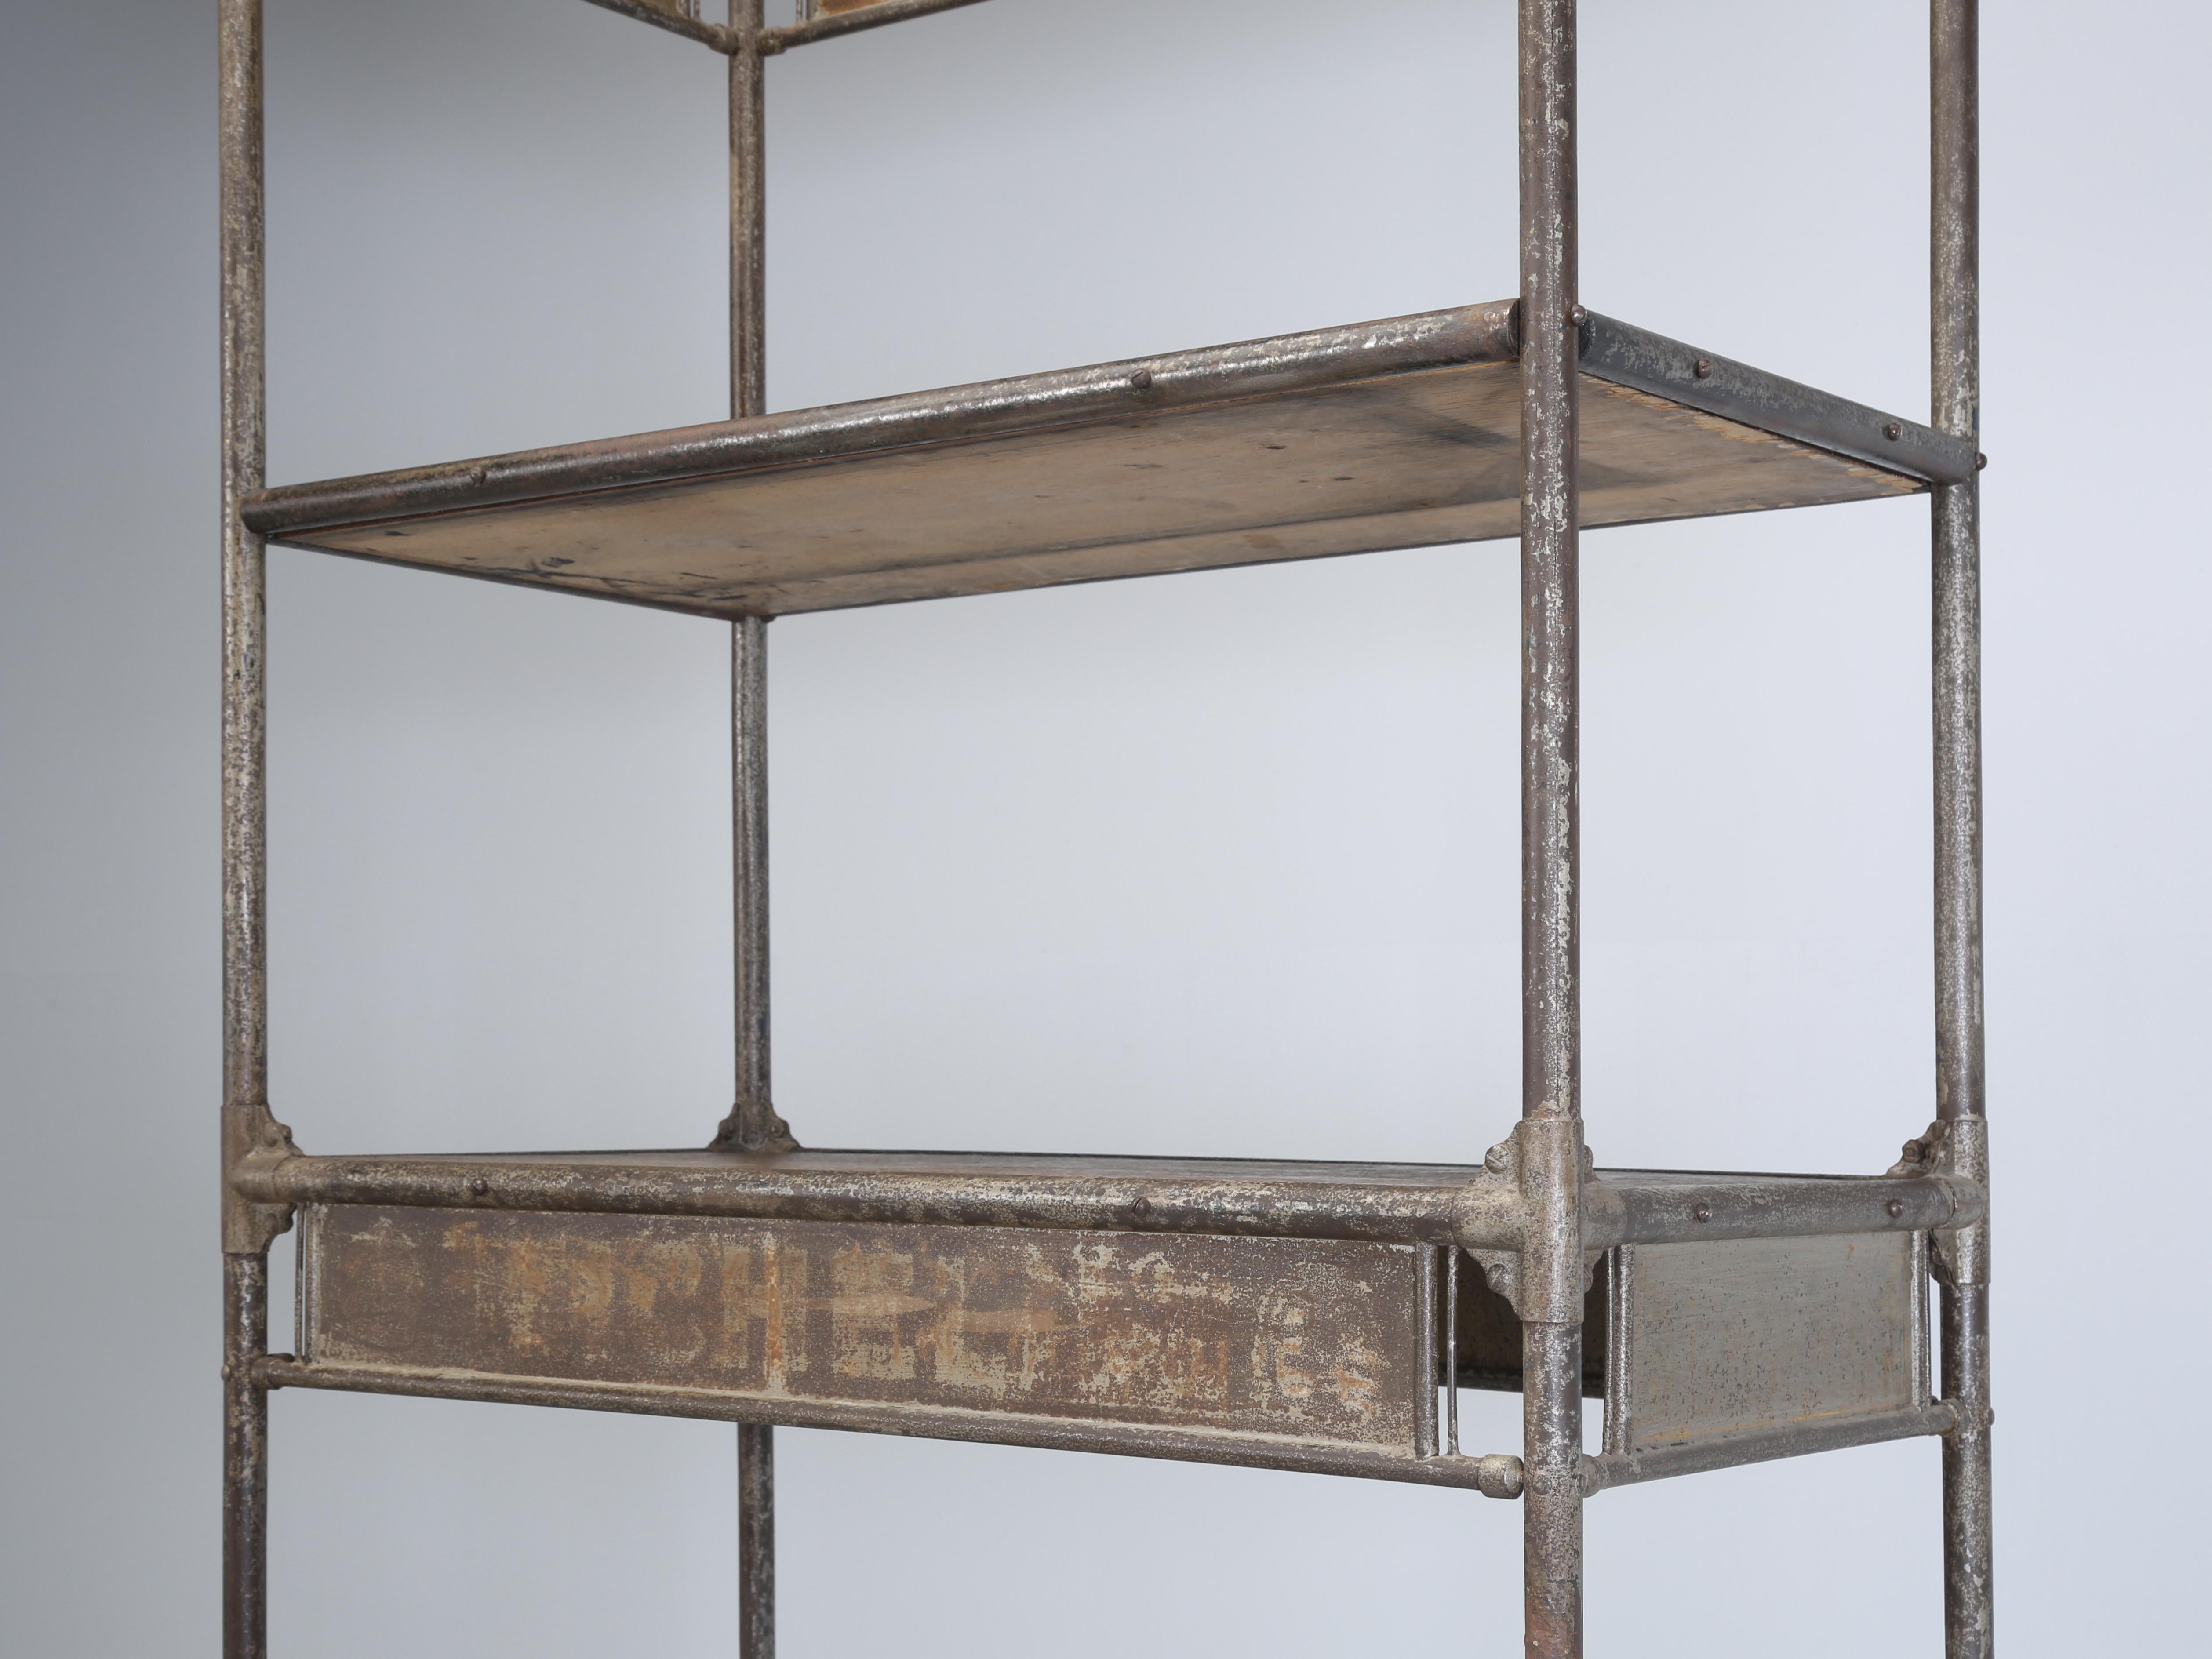 Michelin Antique French Industrial Steel Shelf Unit Made in France c1900-1920 For Sale 10